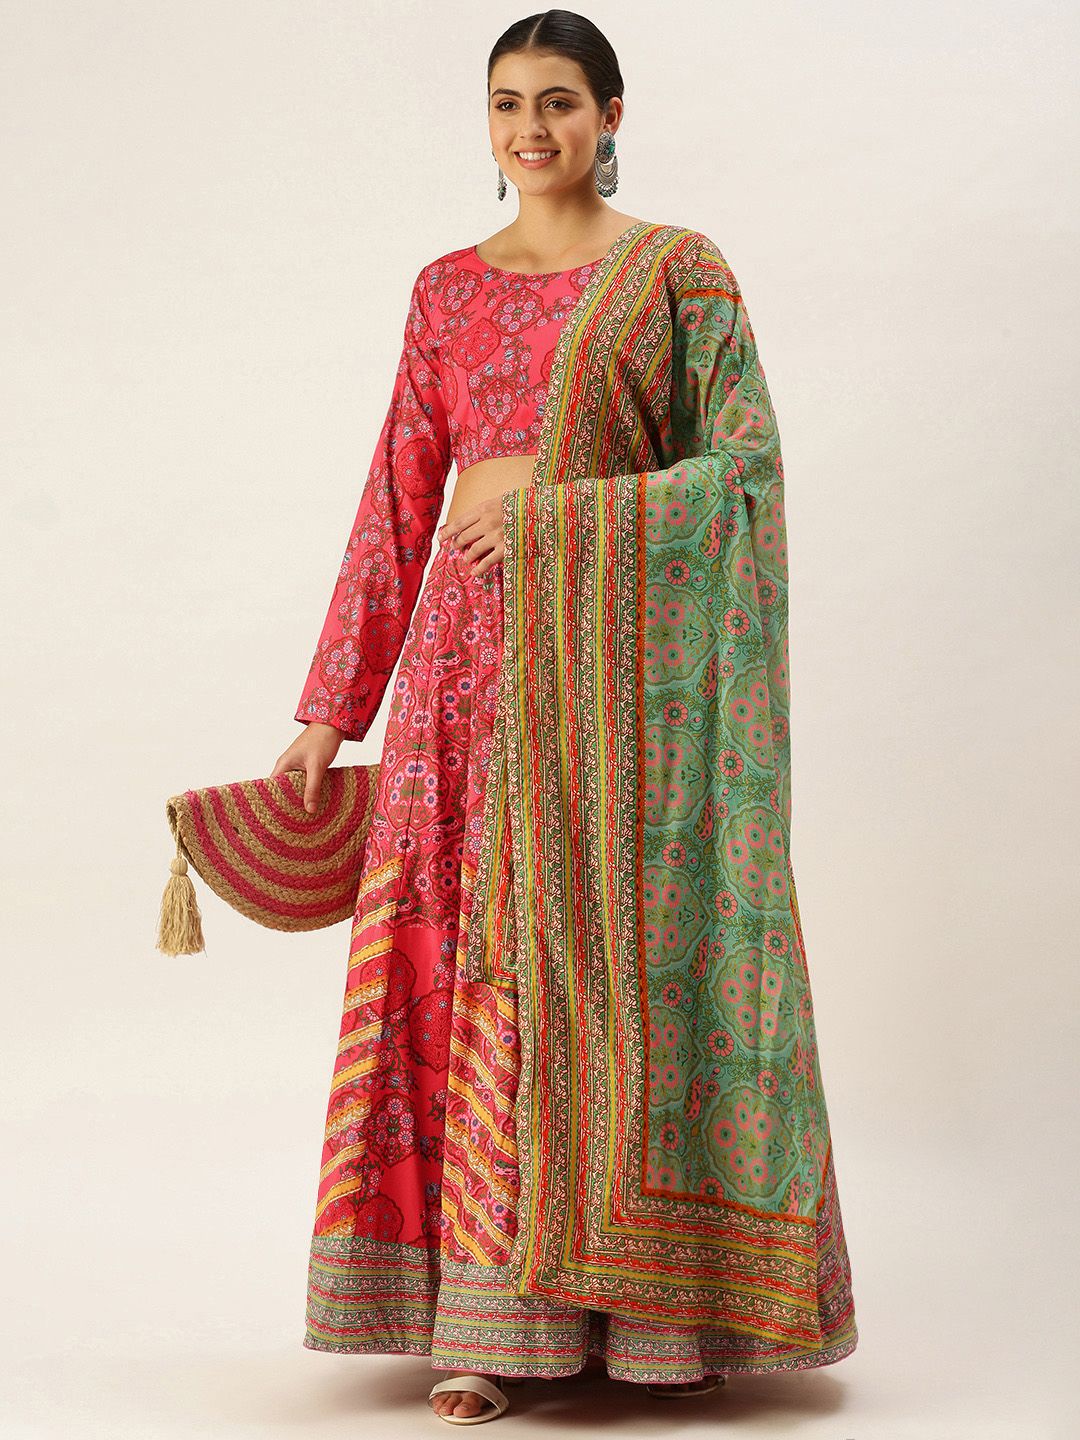 LOOKNBOOK ART Women Pink & Green Semi-Stitched Lehenga & Unstitched Blouse With Dupatta Price in India